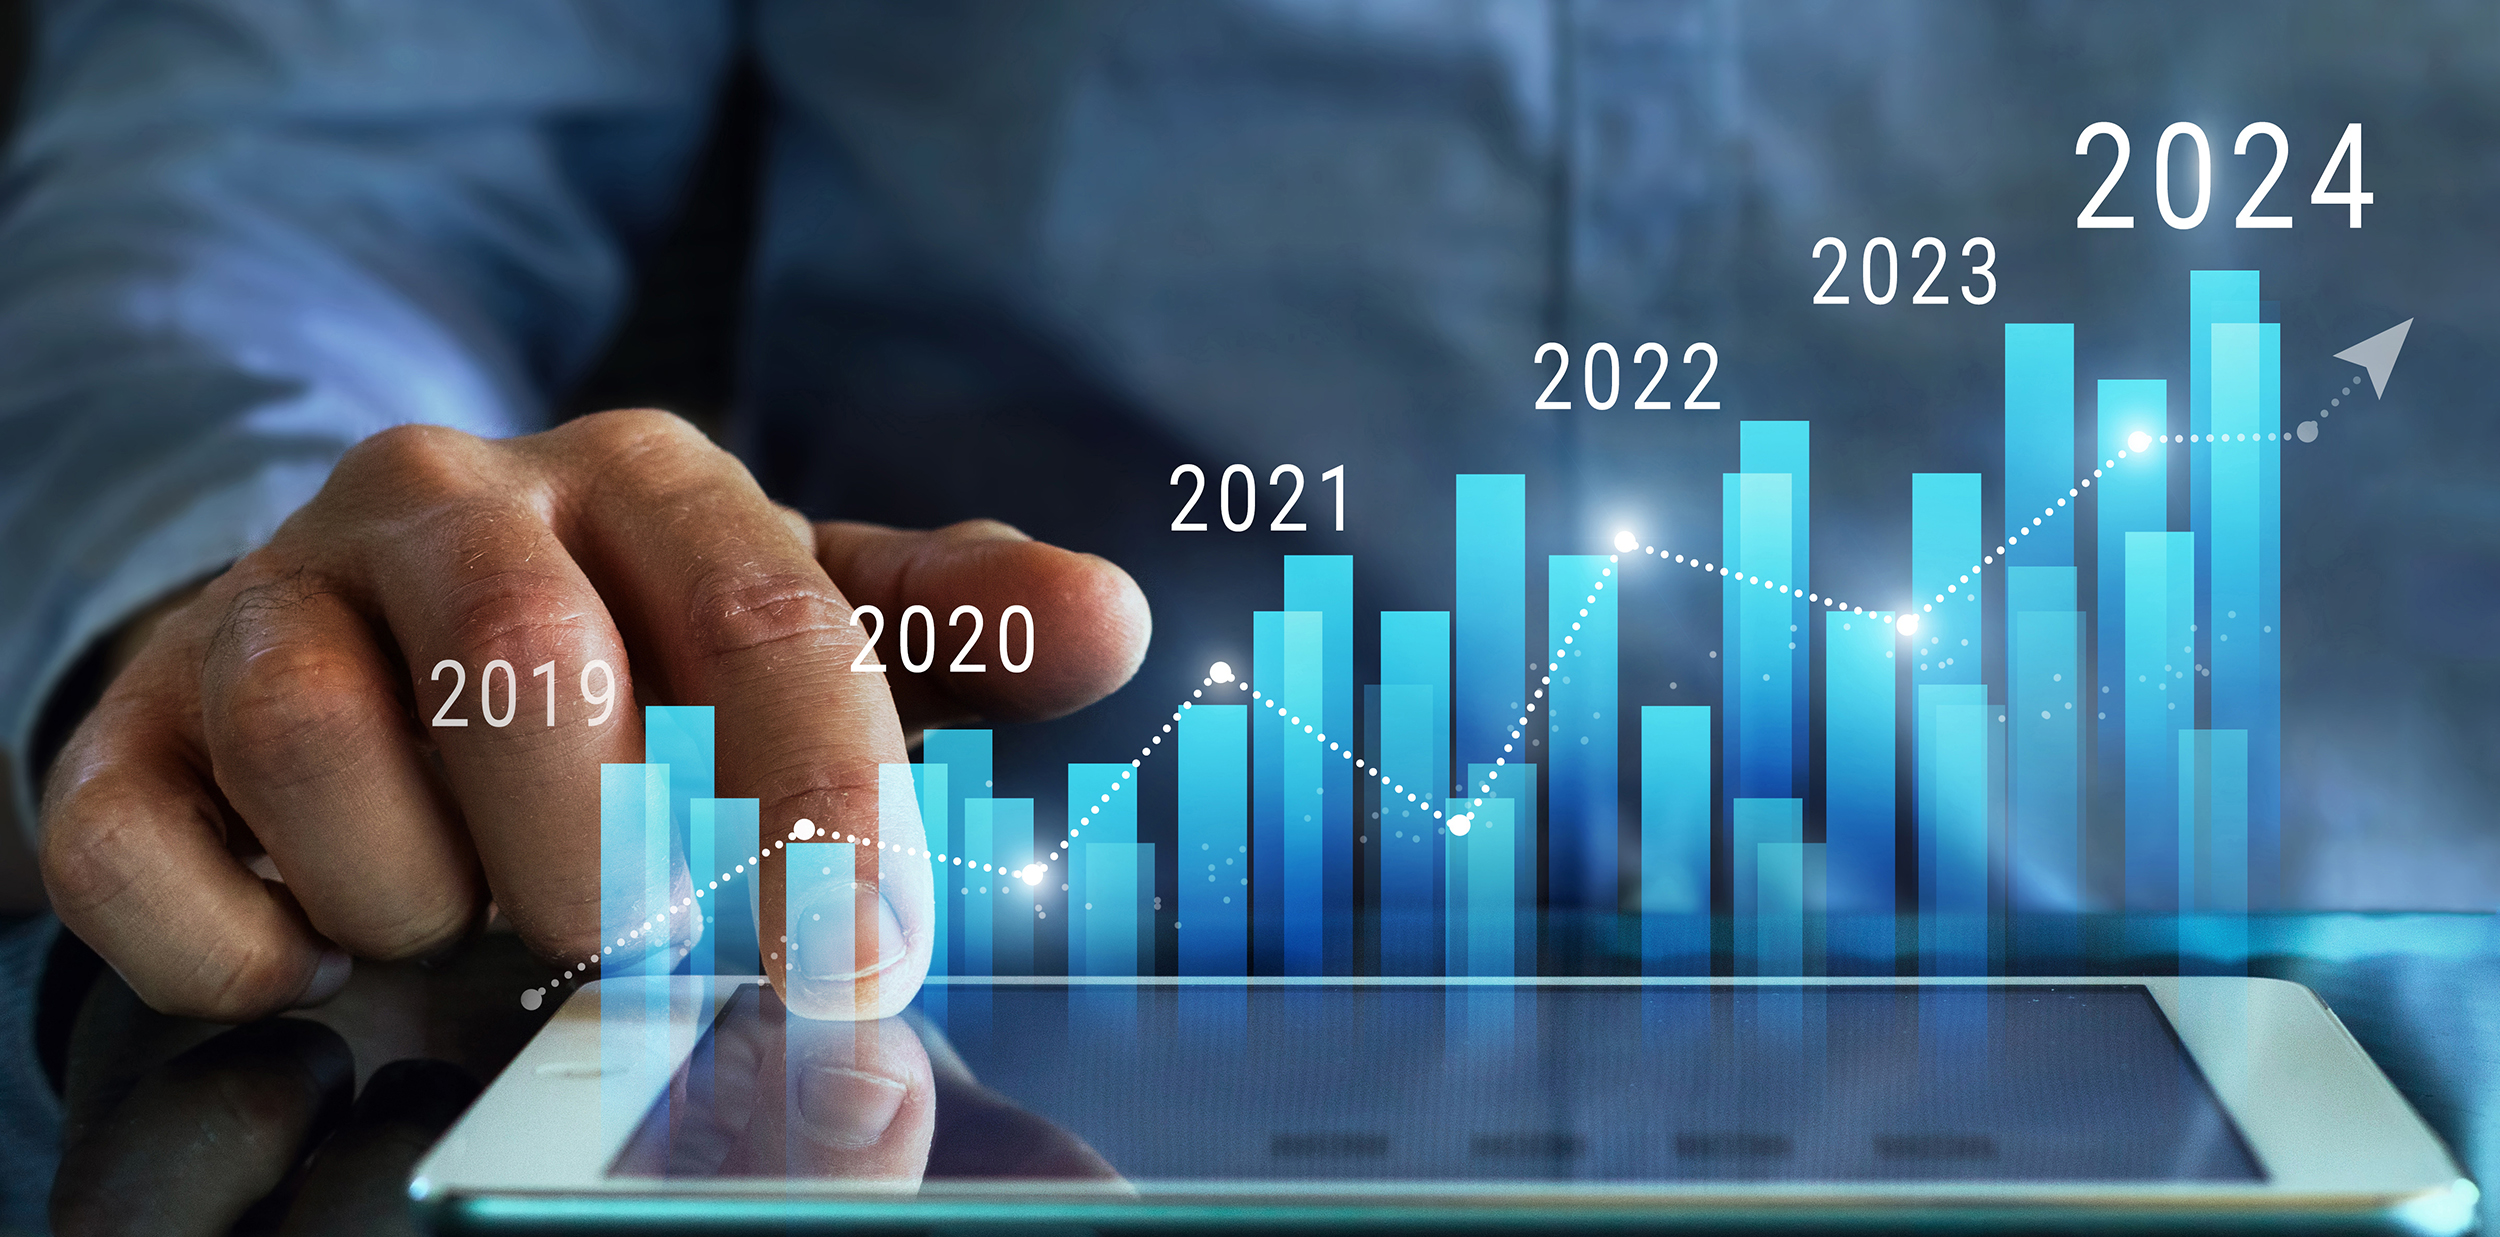 Data Distributors’ 2024 Sales Growth Outlook by End Market Modern